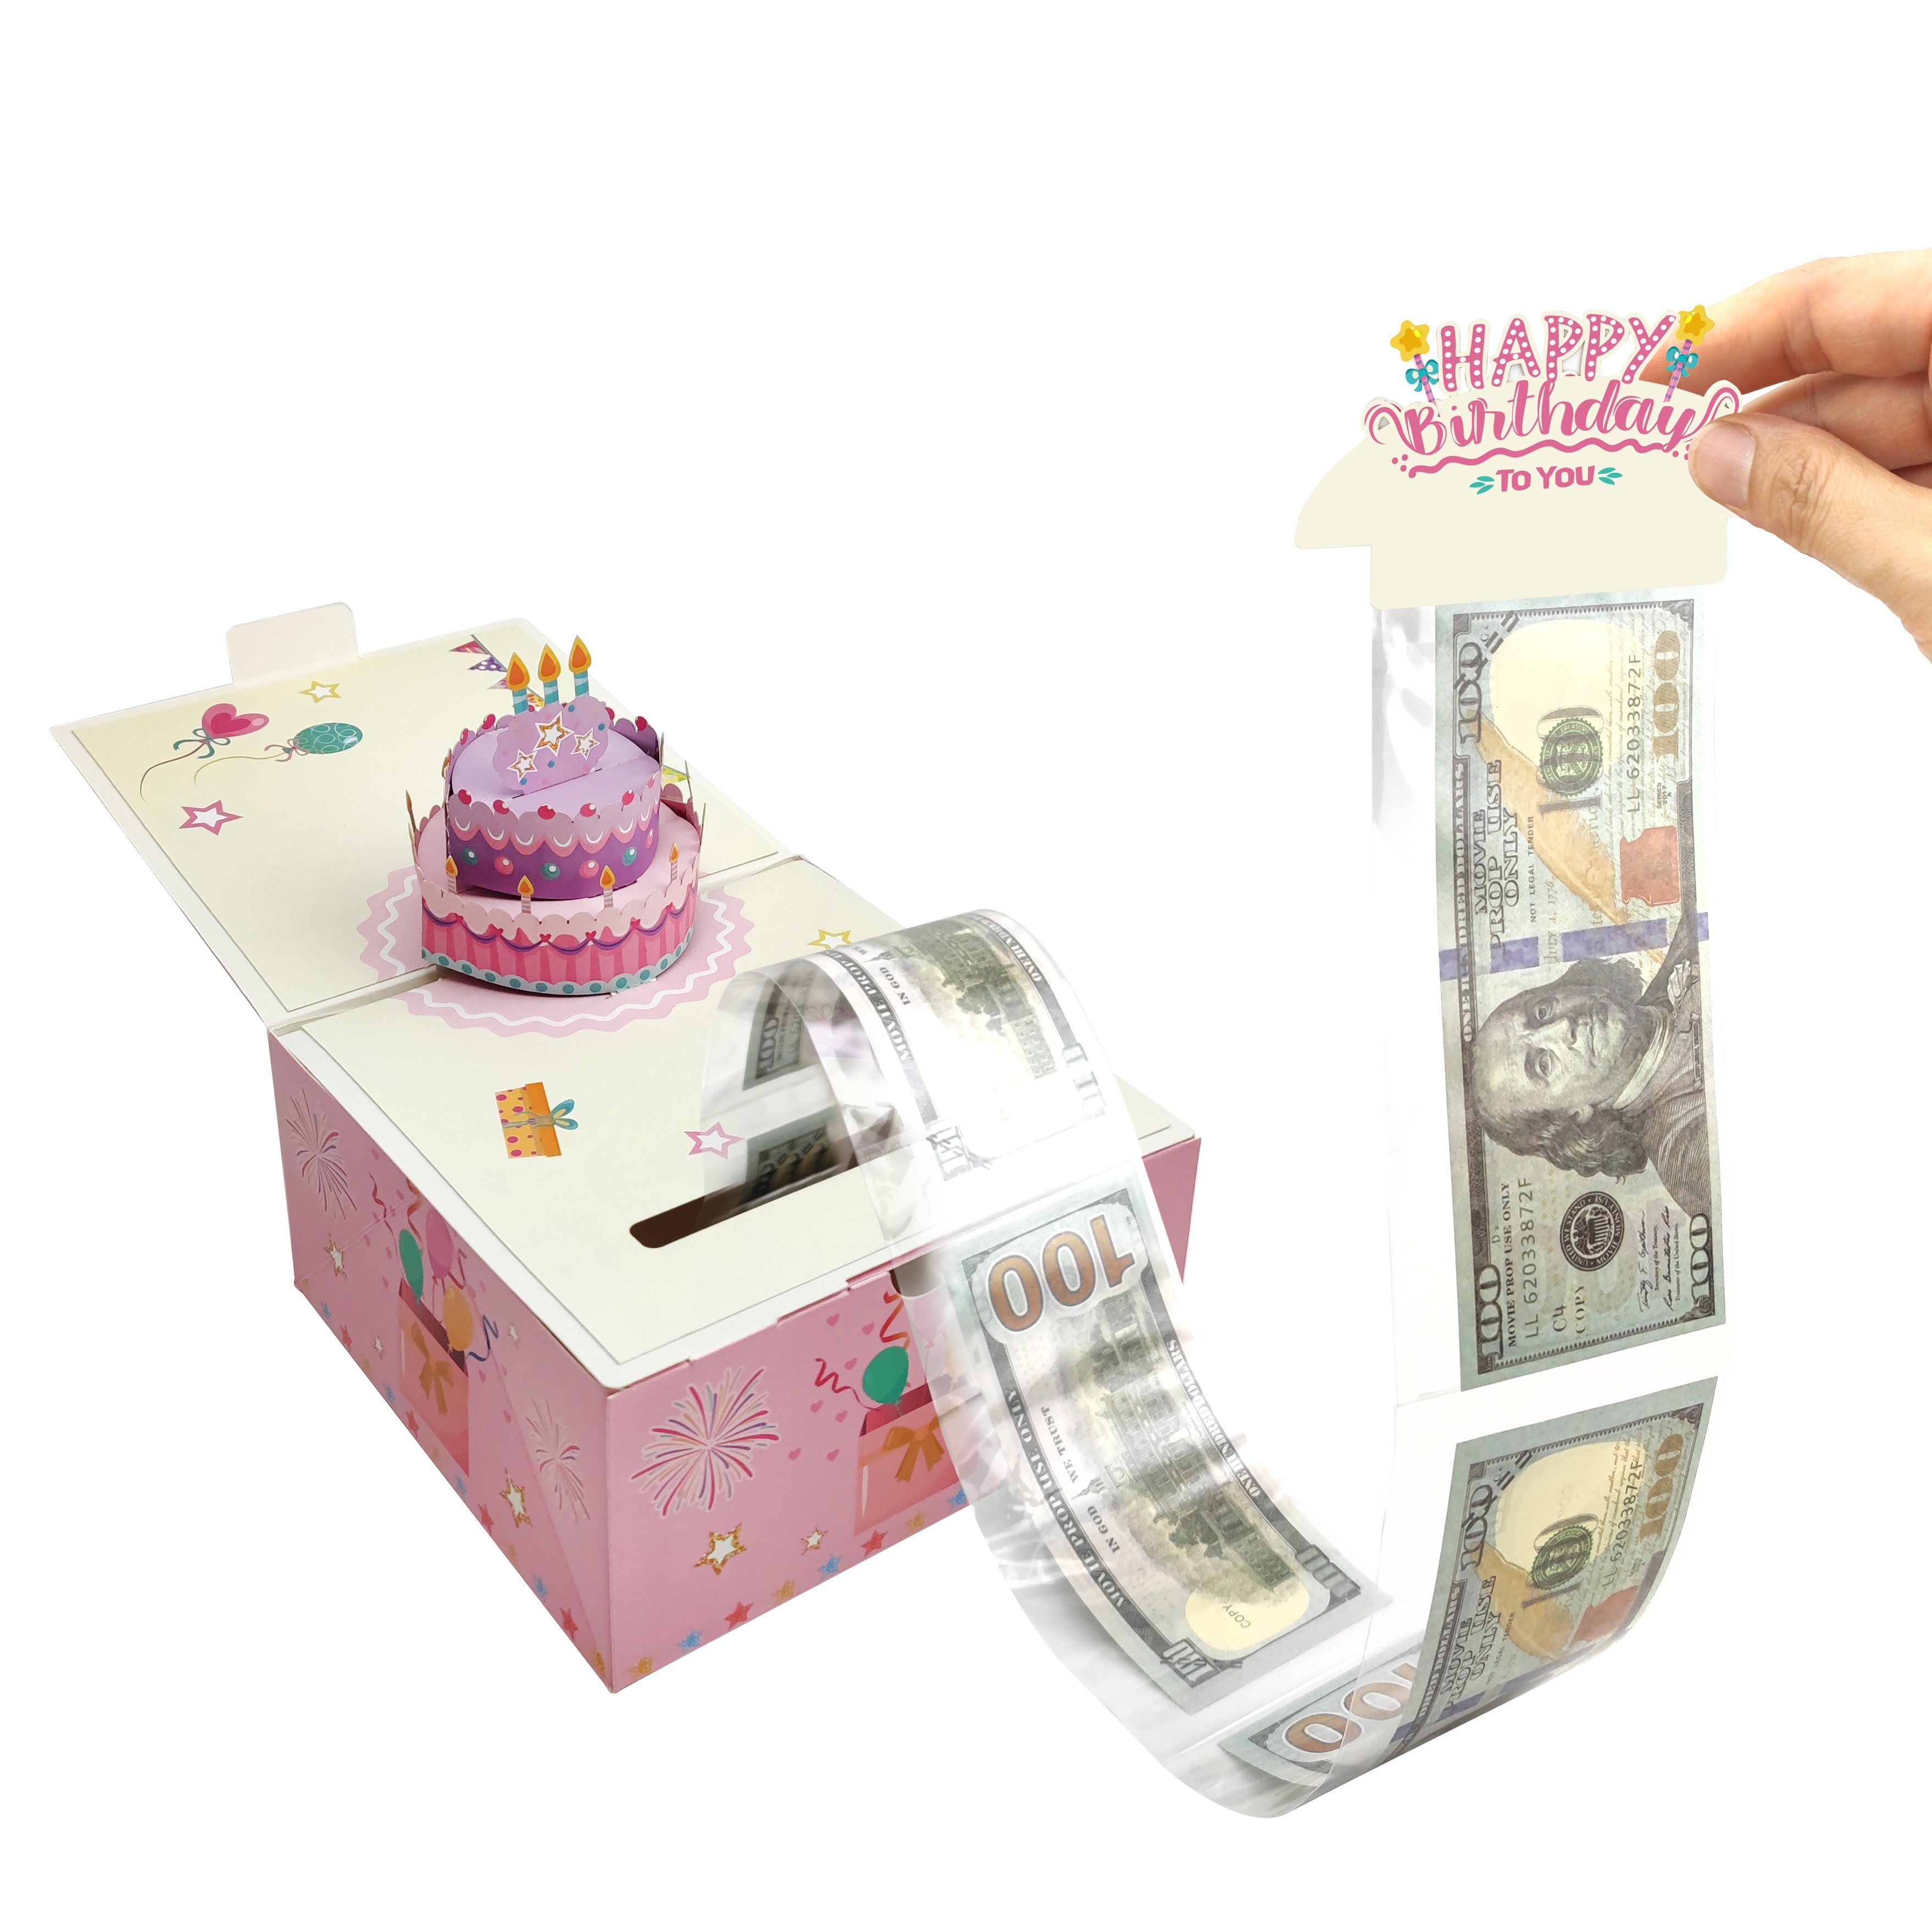 

Surprise Birthday Money Gift Box With Pop-up Card & Diy Age Numbers - Perfect For Husband, Wife, Men, Women - Unique Cash Present Idea (money Not Included)